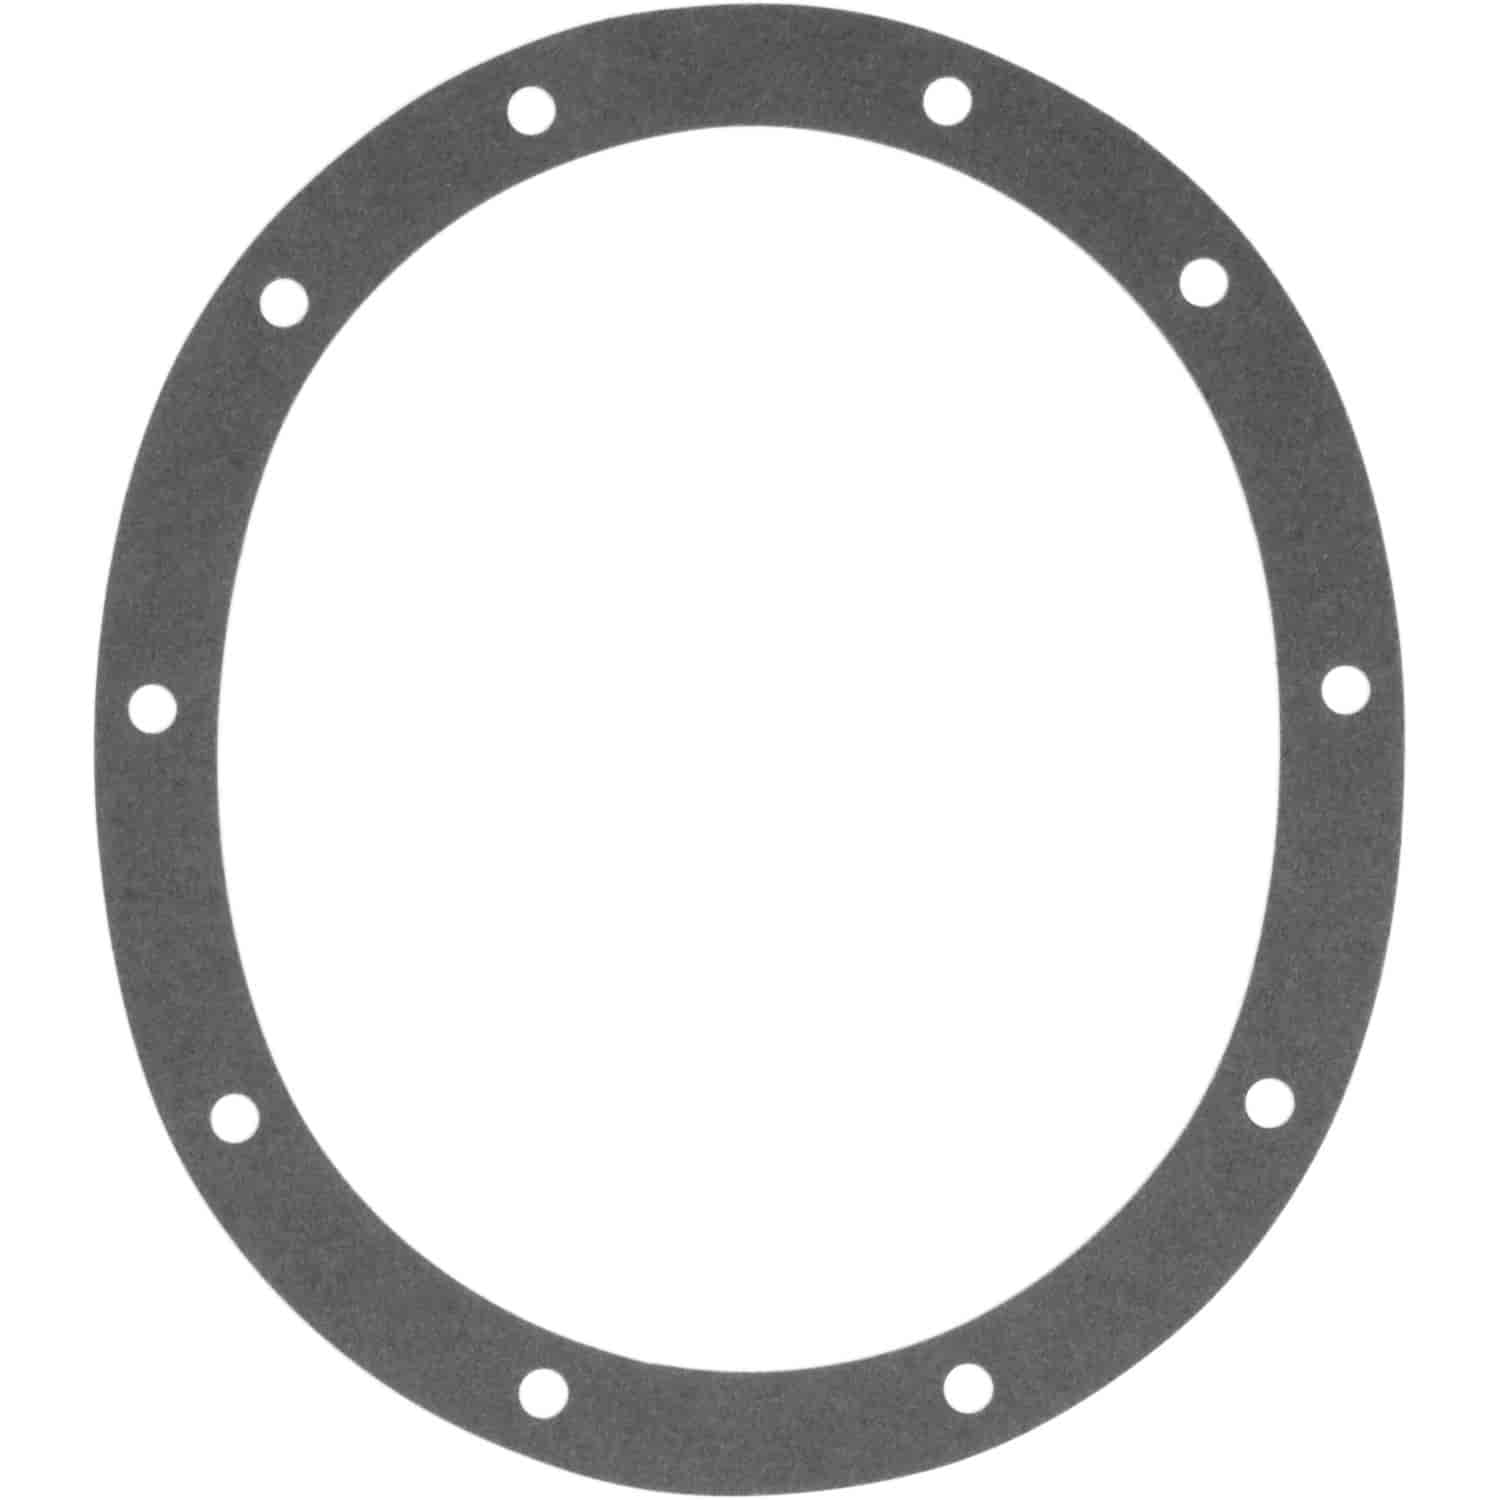 Differential Cover Gasket 10-Bolt Dana 35